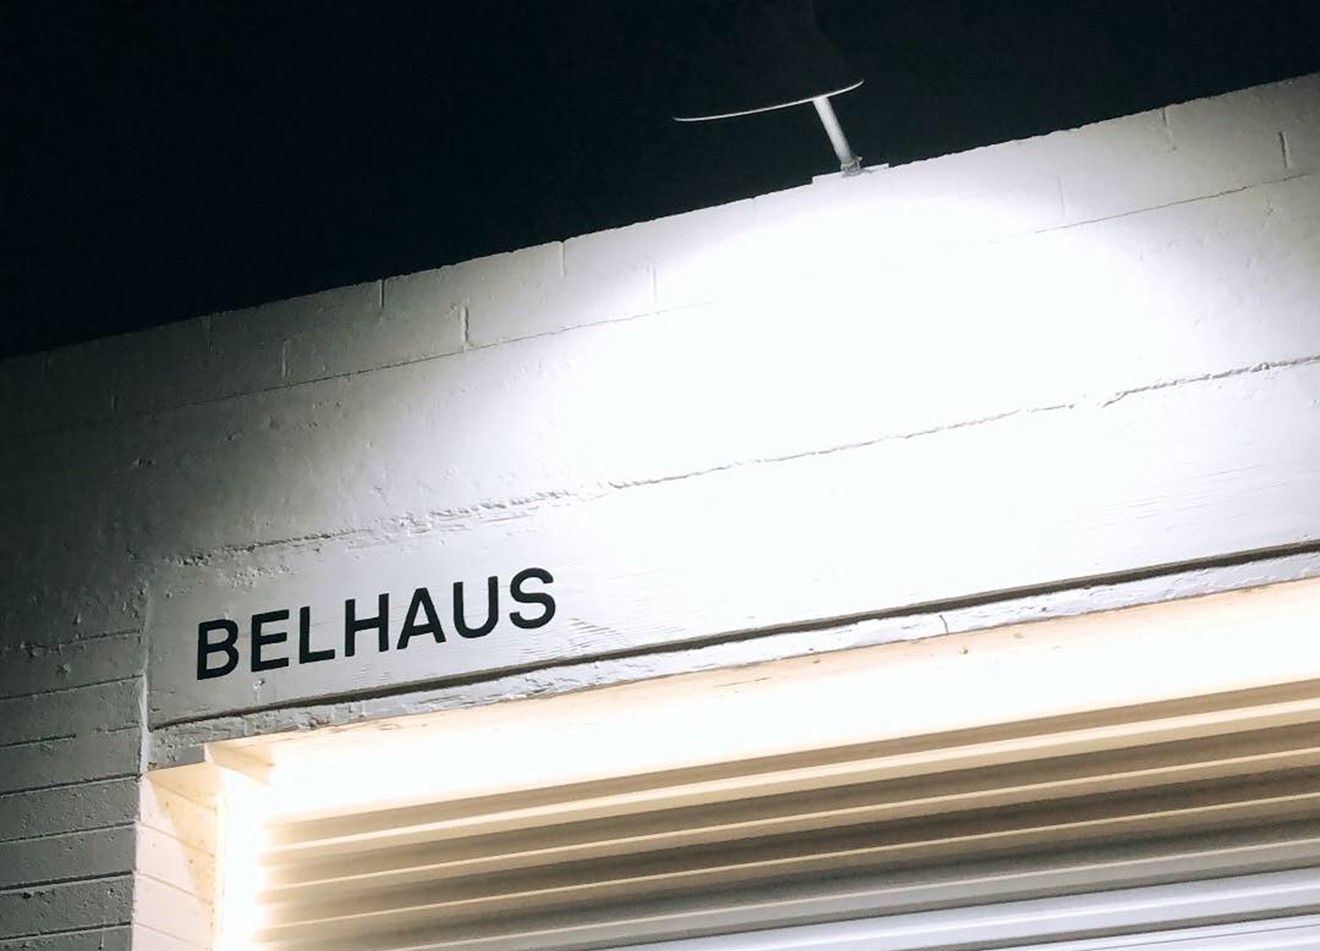 BELHAUS opens on Grand Avenue during April First Friday.